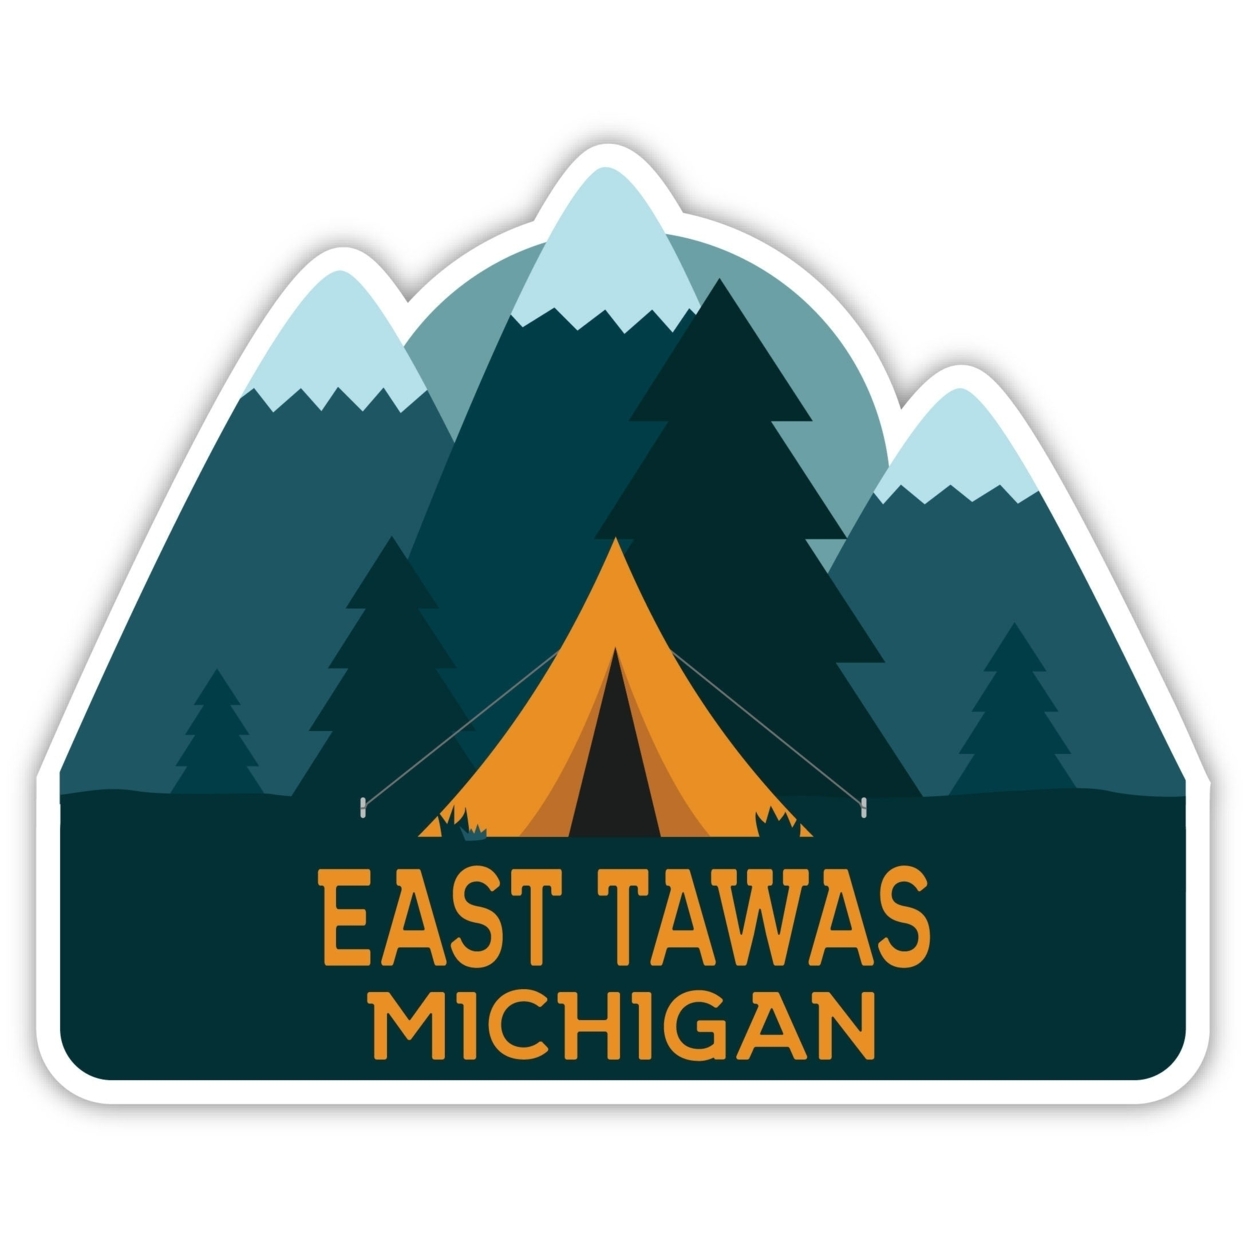 East Tawas Michigan Souvenir Decorative Stickers (Choose Theme And Size) - Single Unit, 10-Inch, Adventures Awaits